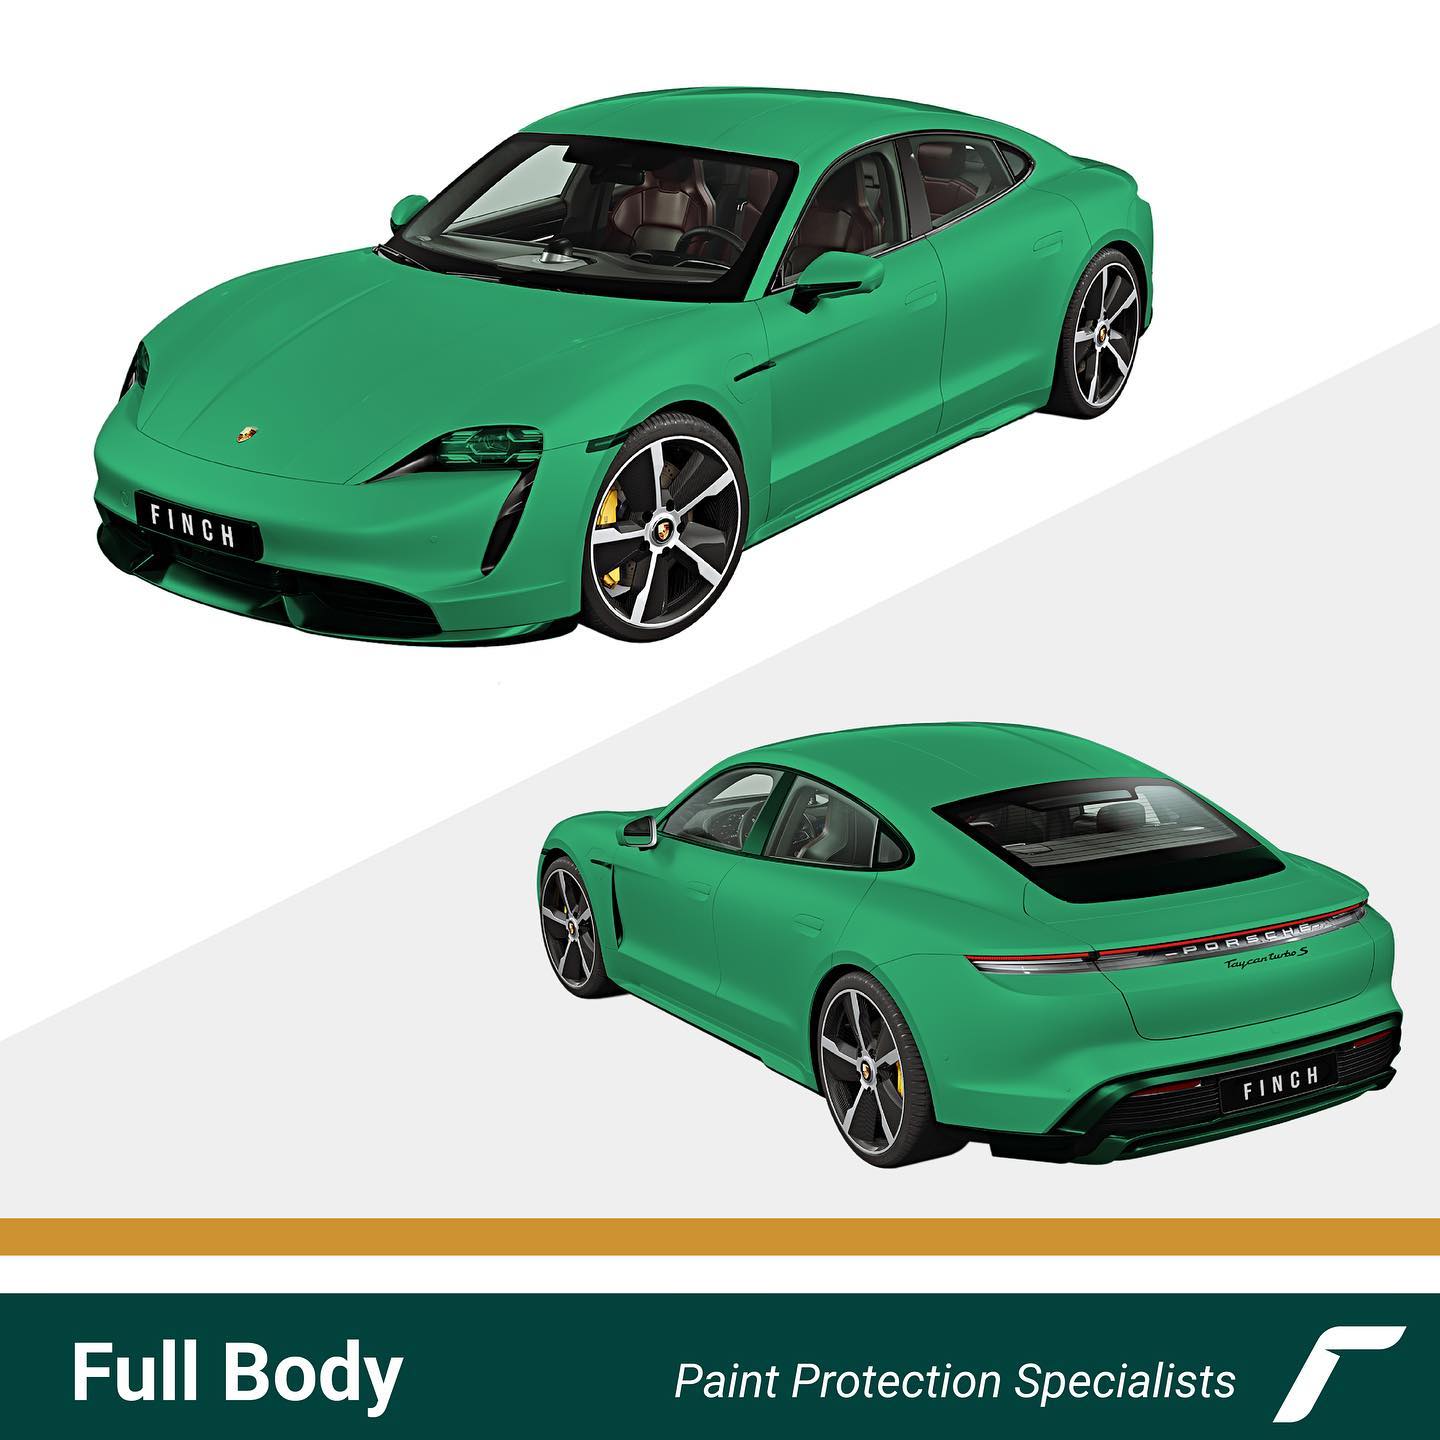 Two angles of a green sports car with full body paint protection by finch, showcased against a white background.